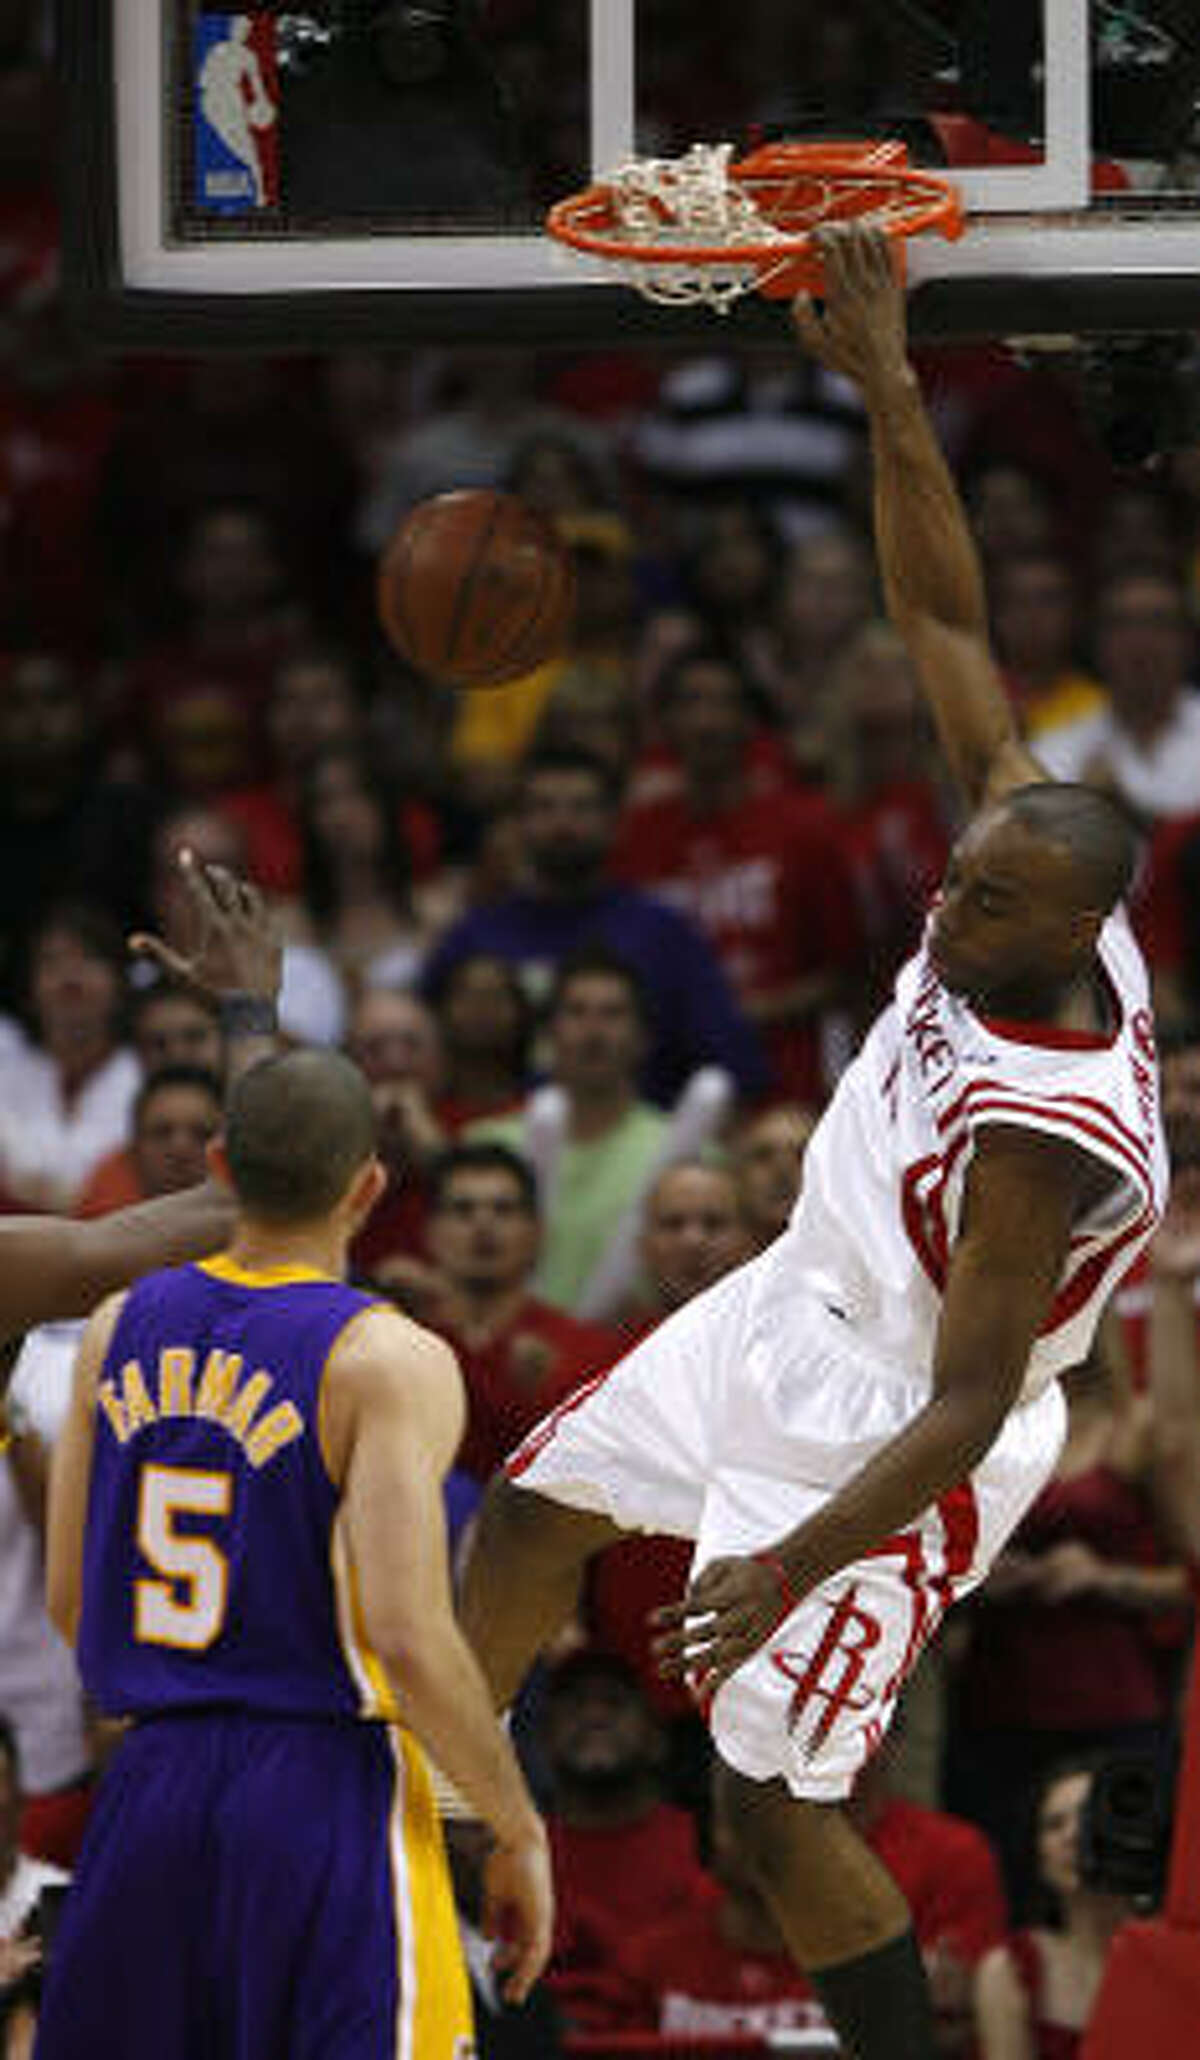 May 14, Game 6: Rockets beat Lakers 95-80 - Aaron Brooks and Luis Scola combined to score 50 to set up the elimination game Sunday in L.A. Carl Landry, shown dunking opposite Lakers guard Jordan Farmar, scored 13 of his 15 points in the second half and had nine rebounds to give the Rockets just the push they needed to finish off the win. Statistics | Series tied 3-3